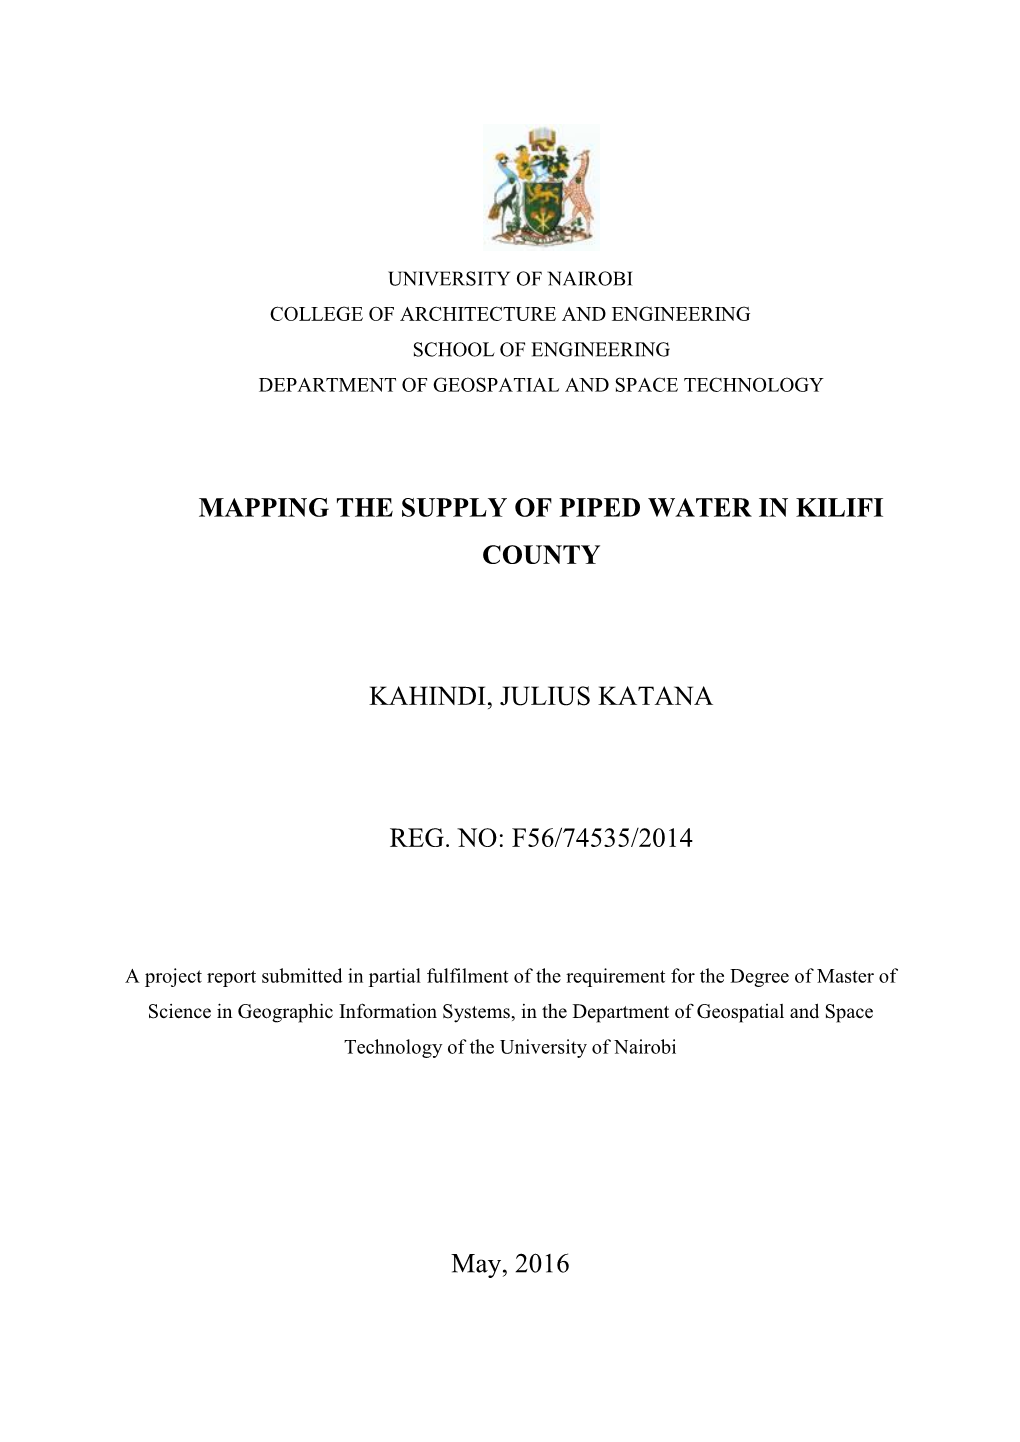 Mapping the Supply of Piped Water in Kilifi County